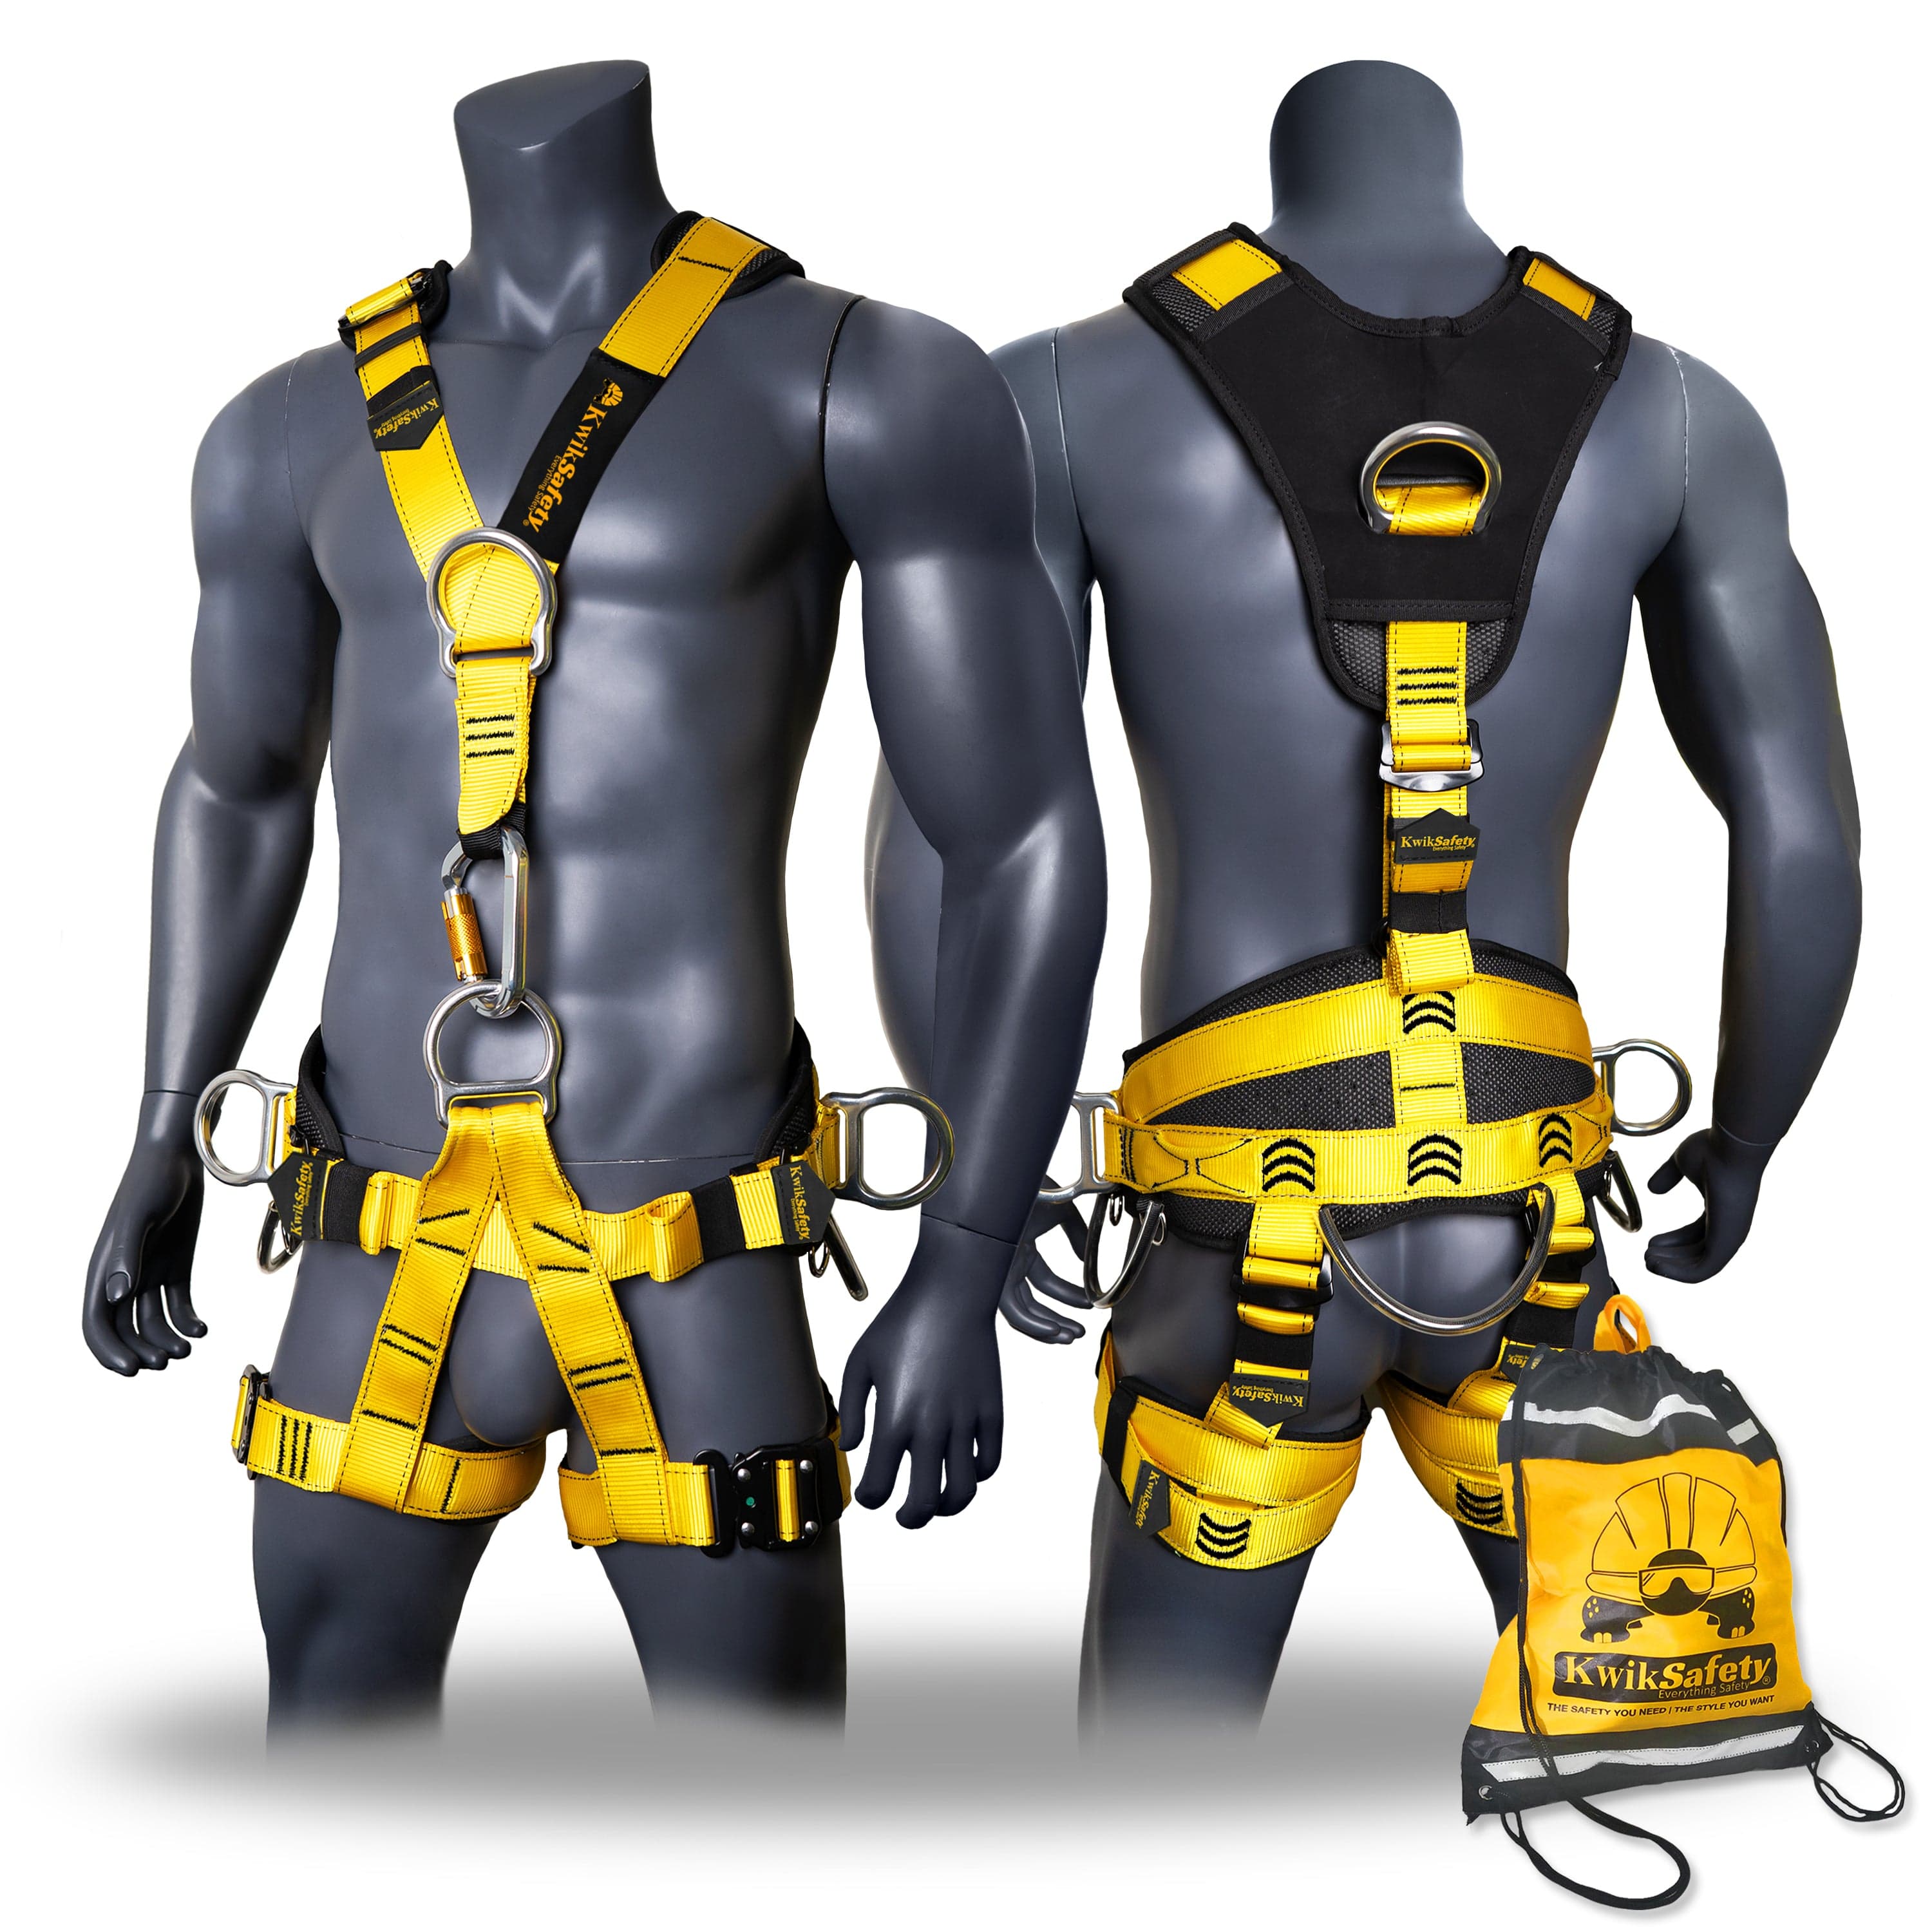 KwikSafety CANOPY KING Full Body Climbing Harness [5 D-Ring, Back   Shoulder Support] Rock Climbing, Rappelling, Recreational Tree Climbing  Harness Model No.: KS6609 KwikSafety